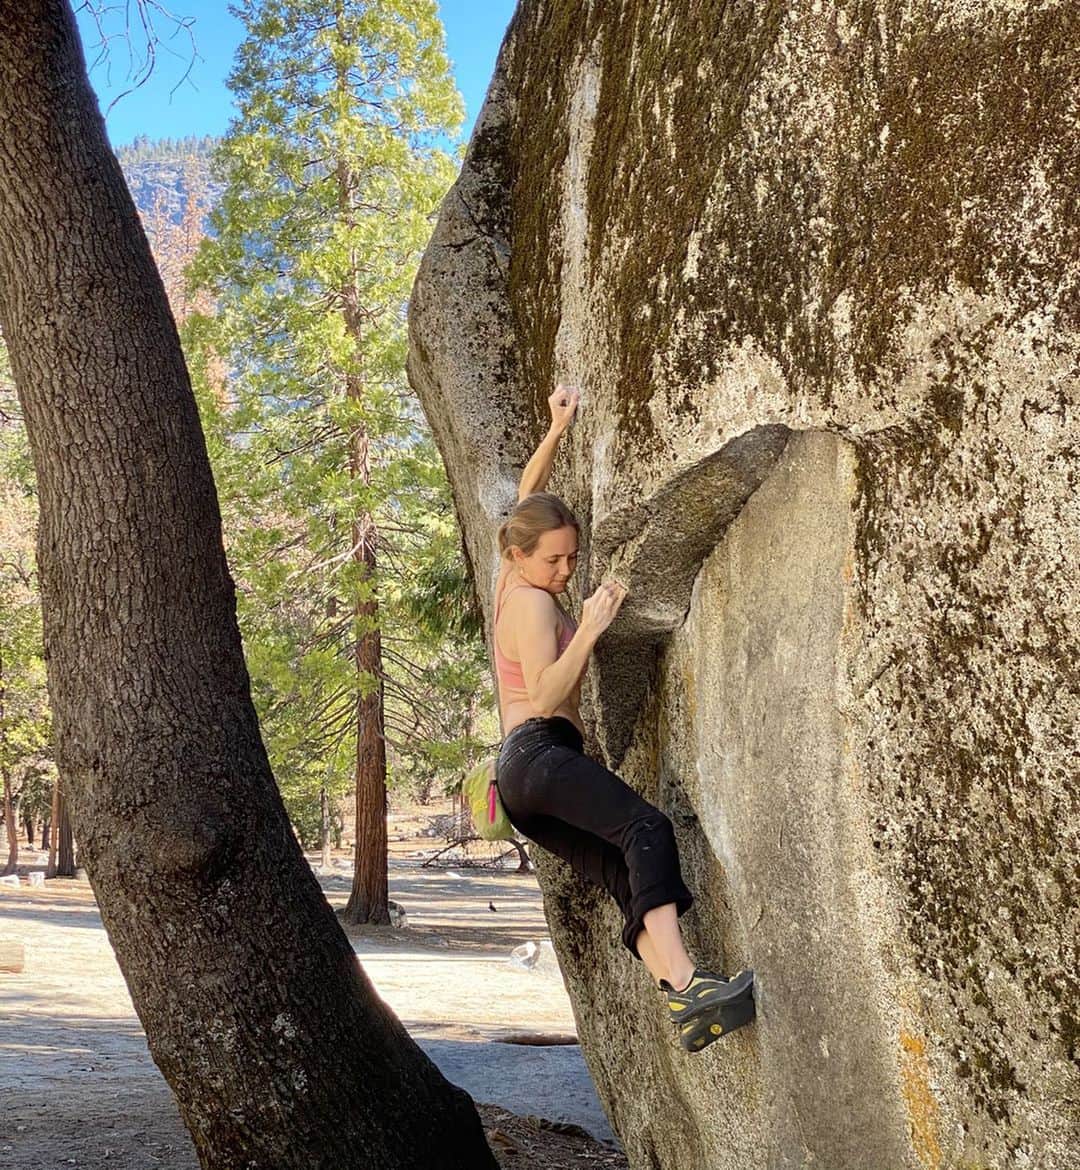 ベス・ロッデンのインスタグラム：「Last week I was climbing on the big Columbia boulder when a young man approached me. I assumed he’d ask what we were climbing on and we made small talk for a bit. After a bit he said “I really appreciate your posts on body image.” It took me totally by surprise. He was tall and muscular and from my outside perspective, the furthest person from someone who would relate to body image issues that I have been writing about. As I stood there listening to him, my heart softened hearing that he had been a competitive high school football player and ever since he started climbing he's been trying to get leaner to resemble his peers.  I went to the Columbia boulder that day to try the classic Bates Problem mid week so I didn't have to deal with that many people. But as I ended my day, my short conversation with Nate stuck with me. I was reminded that my most memorable days aren't just about the climbing, they are about this unique community we are all a part of. Nate and I didn't climb together, and if you put the two of us next to each other we look about as different as you can get. Climbing provides such an incredible canvas to connect to people far beyond just the sport, but in a very human way. Even as climbing booms in popularity, it constantly amazes me how it’s kept its genuine qualities that were so unique when I started over two decades ago. Thanks Nate for coming up and talking to me, and thank you to everyone here for the countless comments and messages about our individual journeys. What a treat to have climbing be a vehicle for all of us to push beyond not just our physical boundaries but our emotional ones as well.  Pics: Me on The Bates Problem and Nate as a football player and afterwards. Check out his latest heartfelt post @noapproachnate // @outdoorresearch @metoliusclimbing @touchstoneclimbing @bluewaterropes @skinourishment @ospreypacks @clifbar @lasportivana #orambassador」